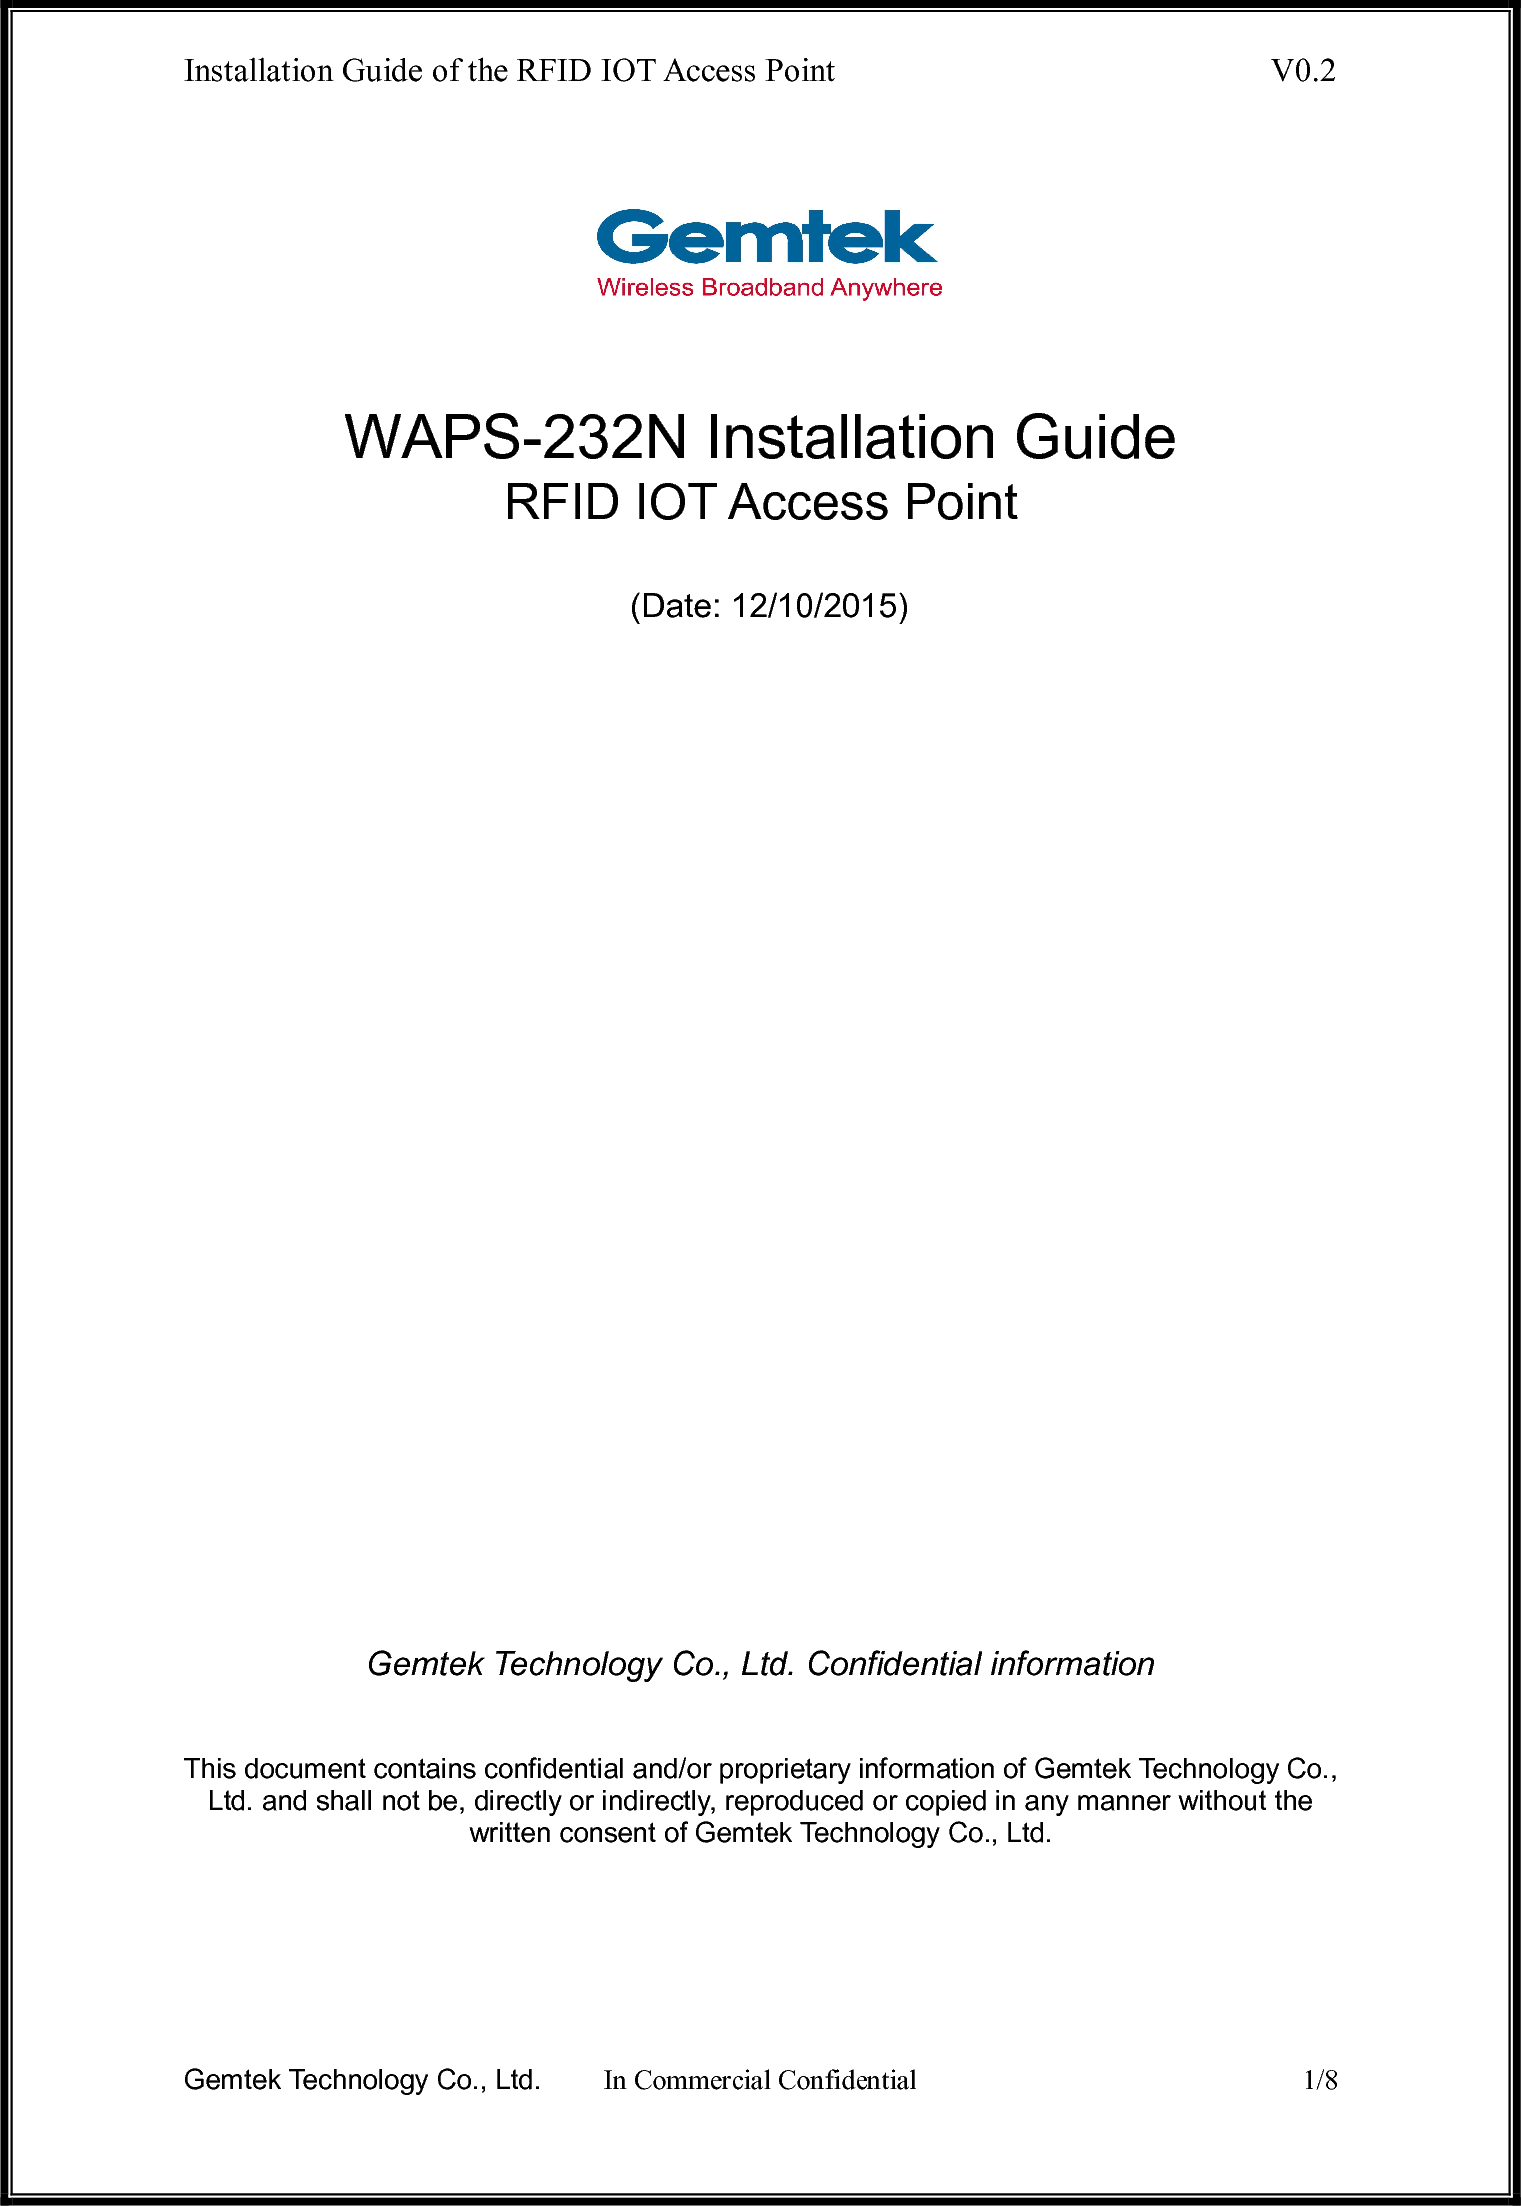 Installation Guide of the RFID IOT Access Point      V0.2  Gemtek Technology Co., Ltd.  In Commercial Confidential  1/8       WAPS-232N Installation Guide RFID IOT Access Point      (Date: 12/10/2015)                              Gemtek Technology Co., Ltd. Confidential information   This document contains confidential and/or proprietary information of Gemtek Technology Co., Ltd. and shall not be, directly or indirectly, reproduced or copied in any manner without the written consent of Gemtek Technology Co., Ltd. 